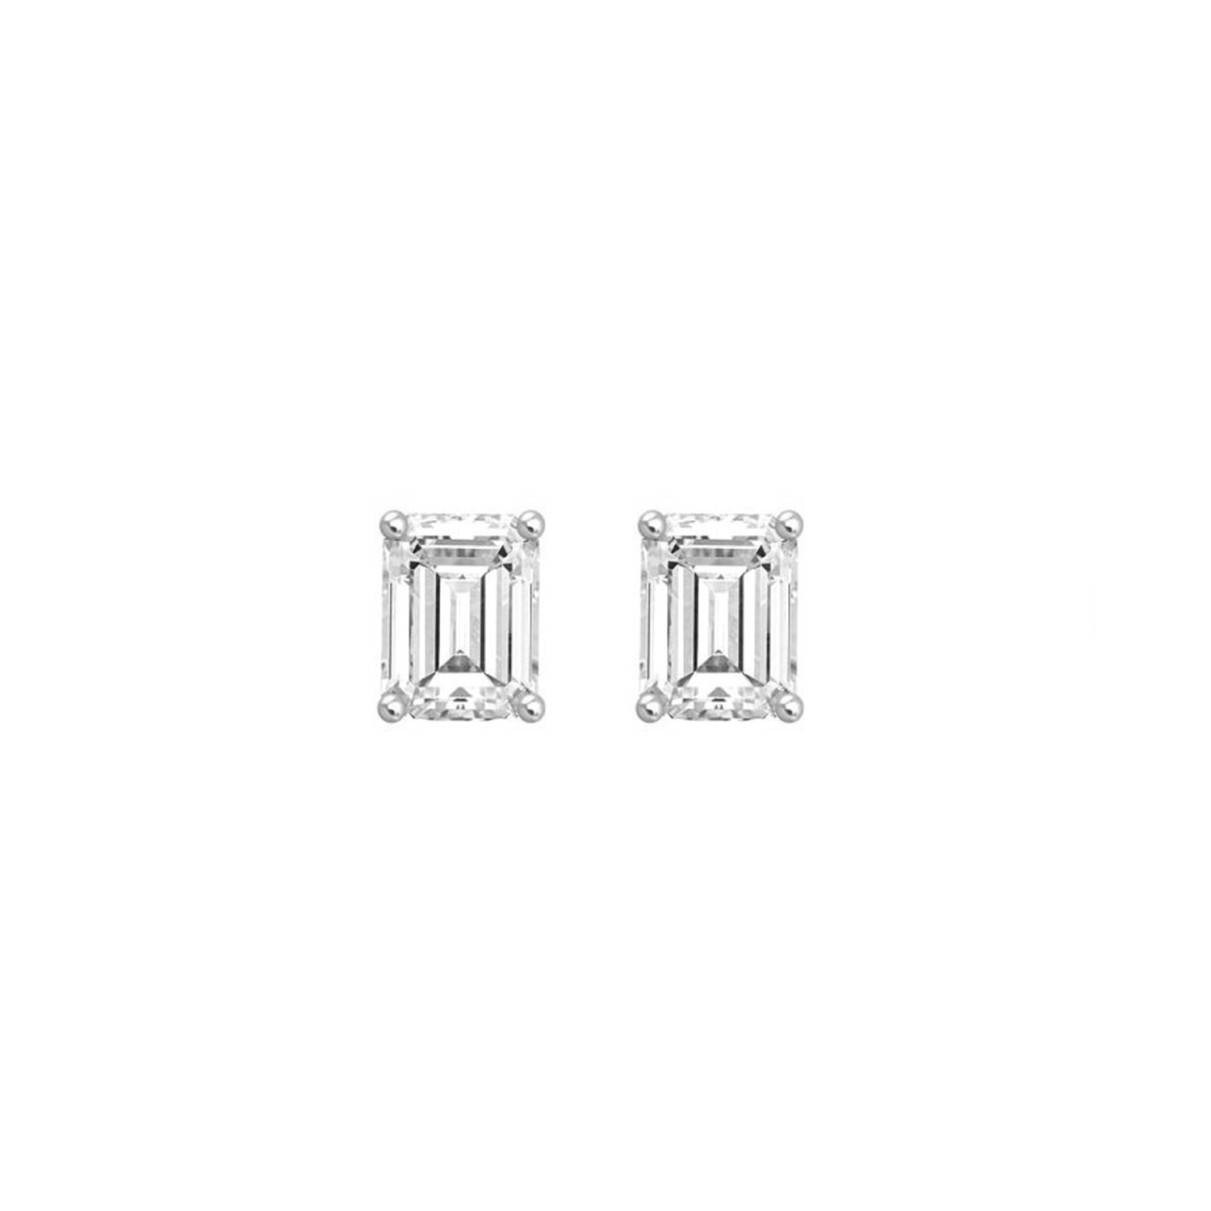 LADIES SOLITAIRE EARRINGS 1CT EMERALD DIAMOND 14K WHITE GOLD